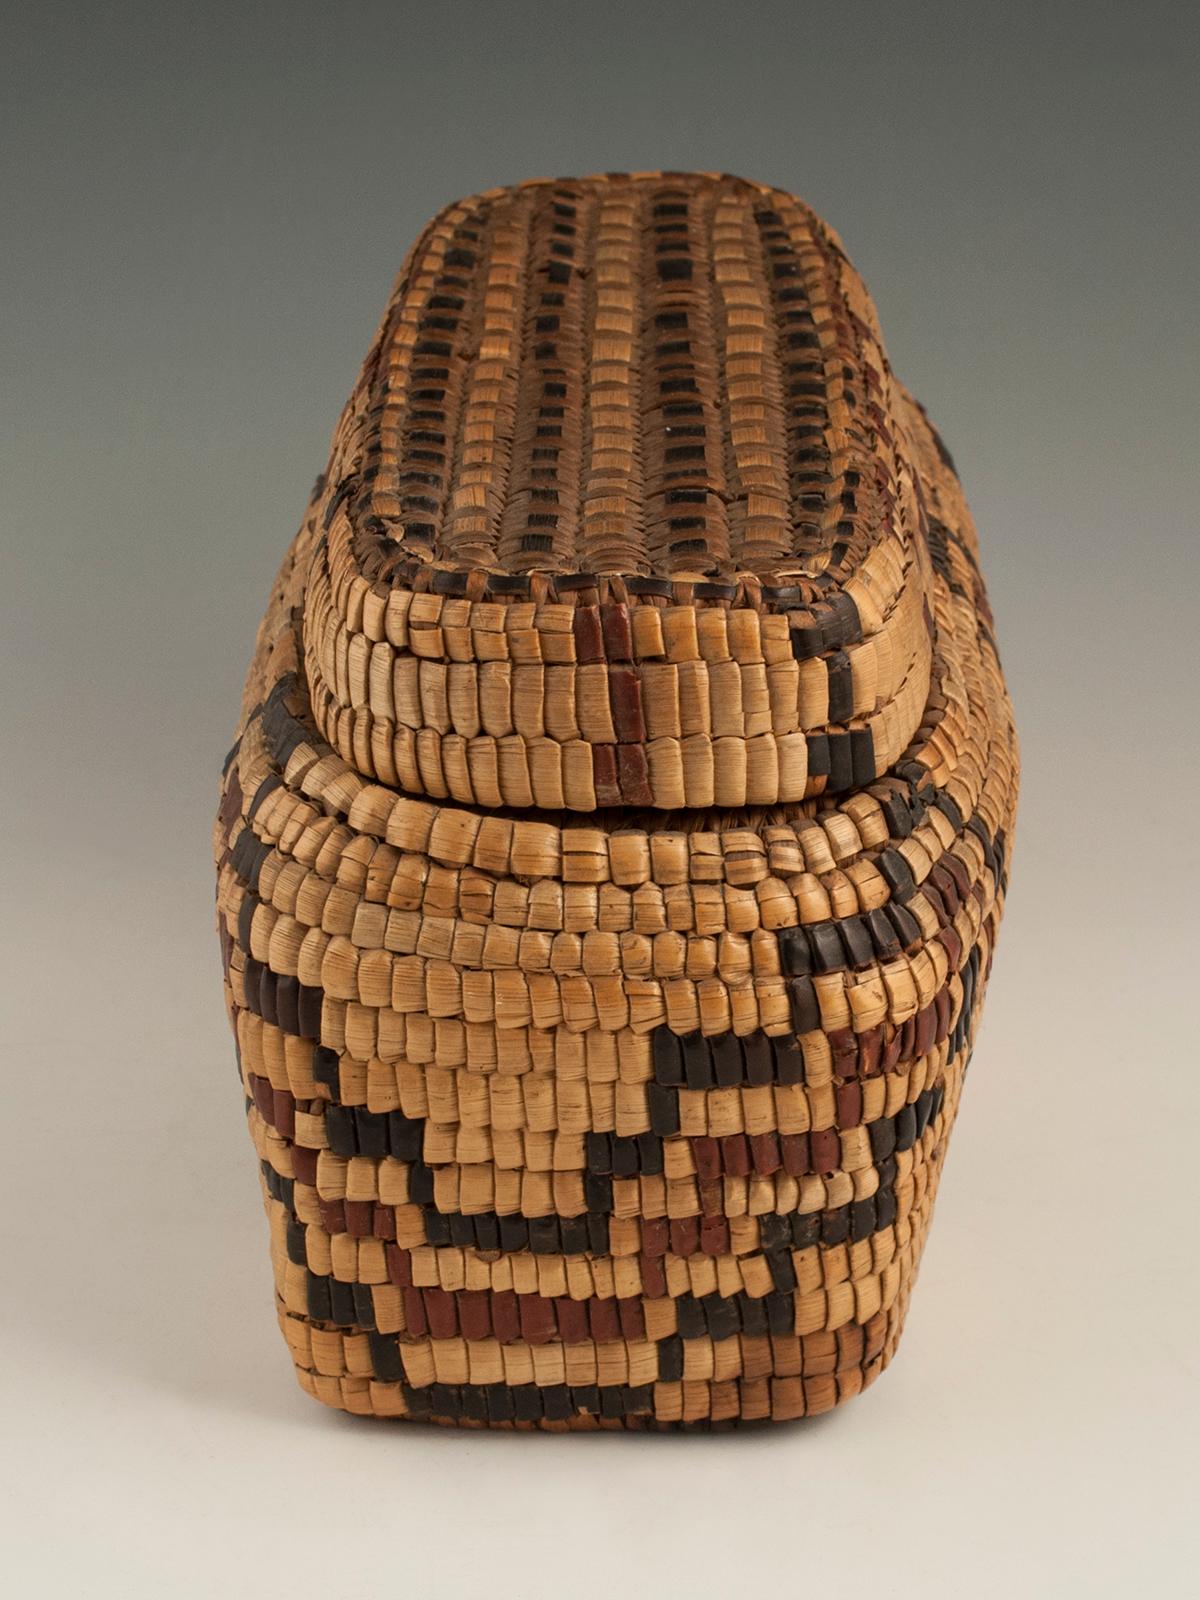 Late 19th-early 20th century tribal Native American Columbia river basket.

A graphic, fully imbricated polychrome reed and cedar bark lidded basket, unique to the Native American tribes of the Columbia River Plateau in the Pacific Northwest.